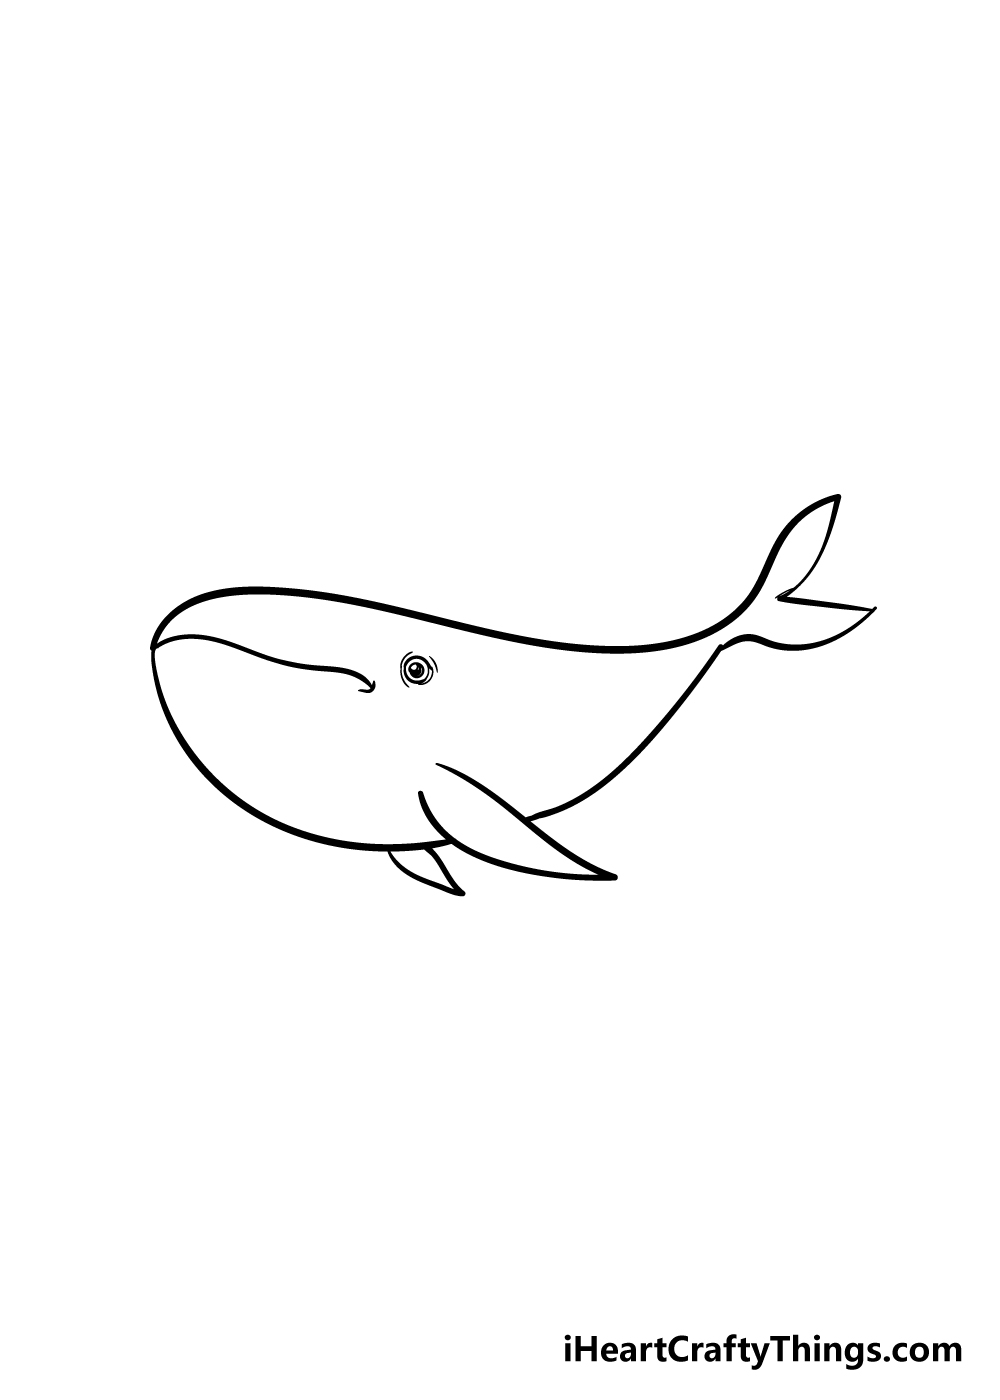 Whale Drawing Made Easy - How To Draw A Whale Step By Step